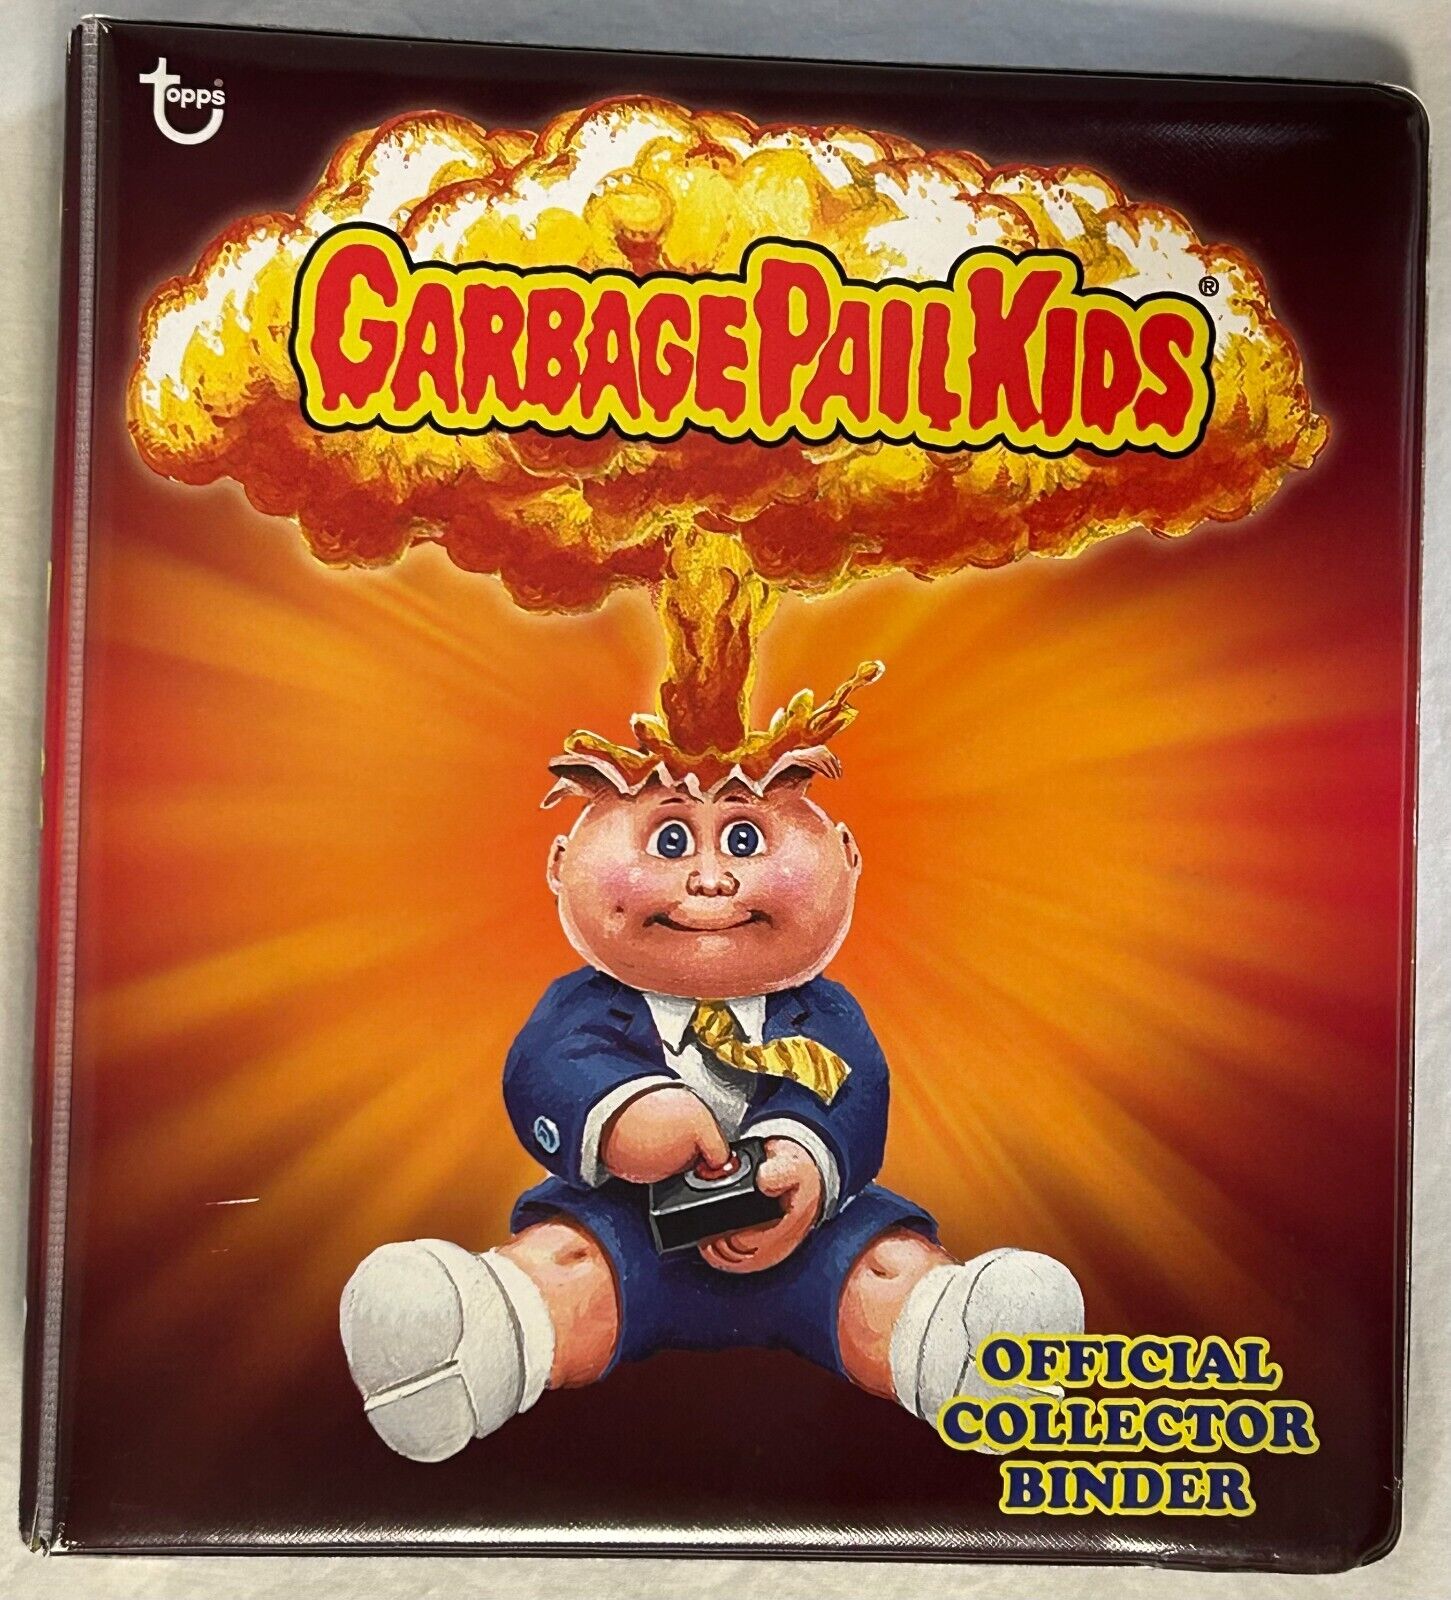 2013 Topps Garbage Pail Kids Official Collector Red ADAM BOMB Card Book BINDER